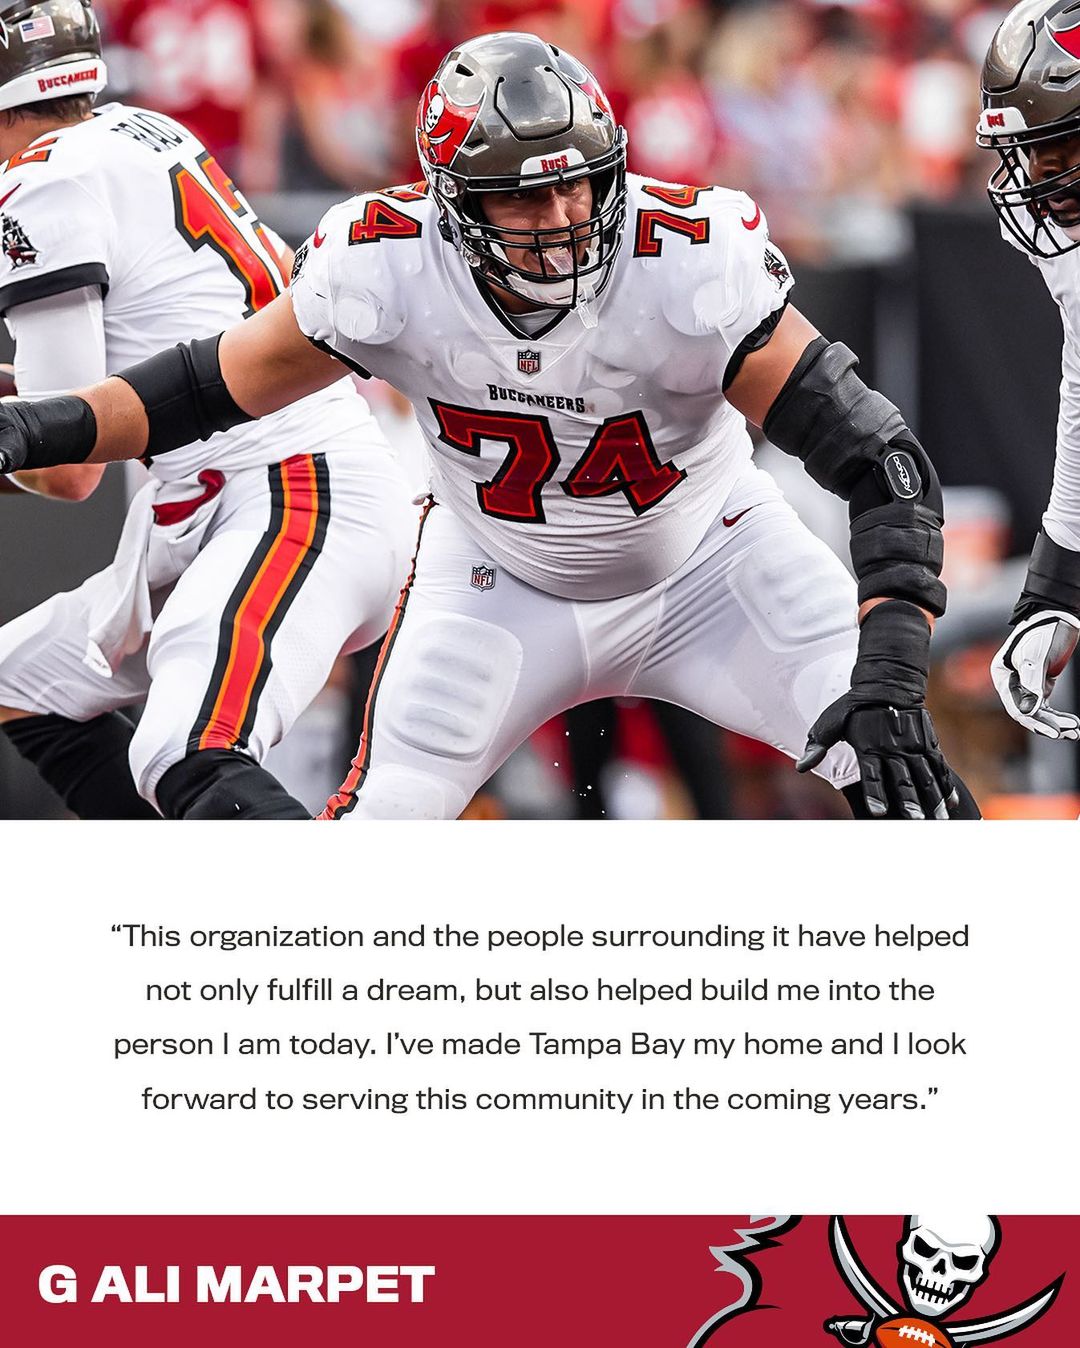 “I’ve made Tampa Bay my home and I look forward to serving this community in the...